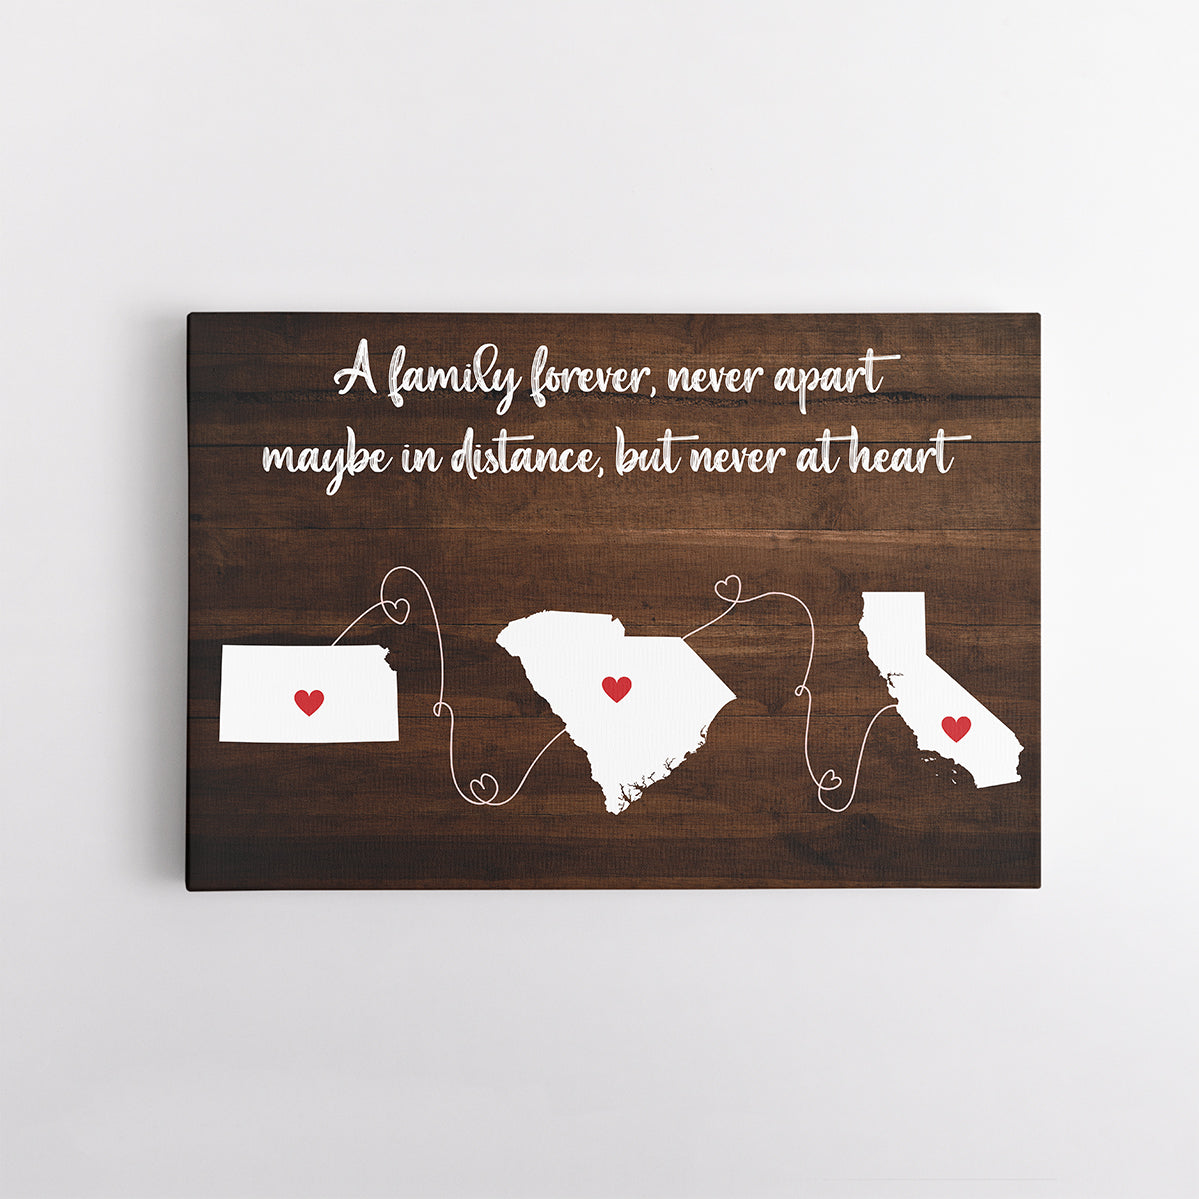 A Family Forever, Never Apart - Canvas